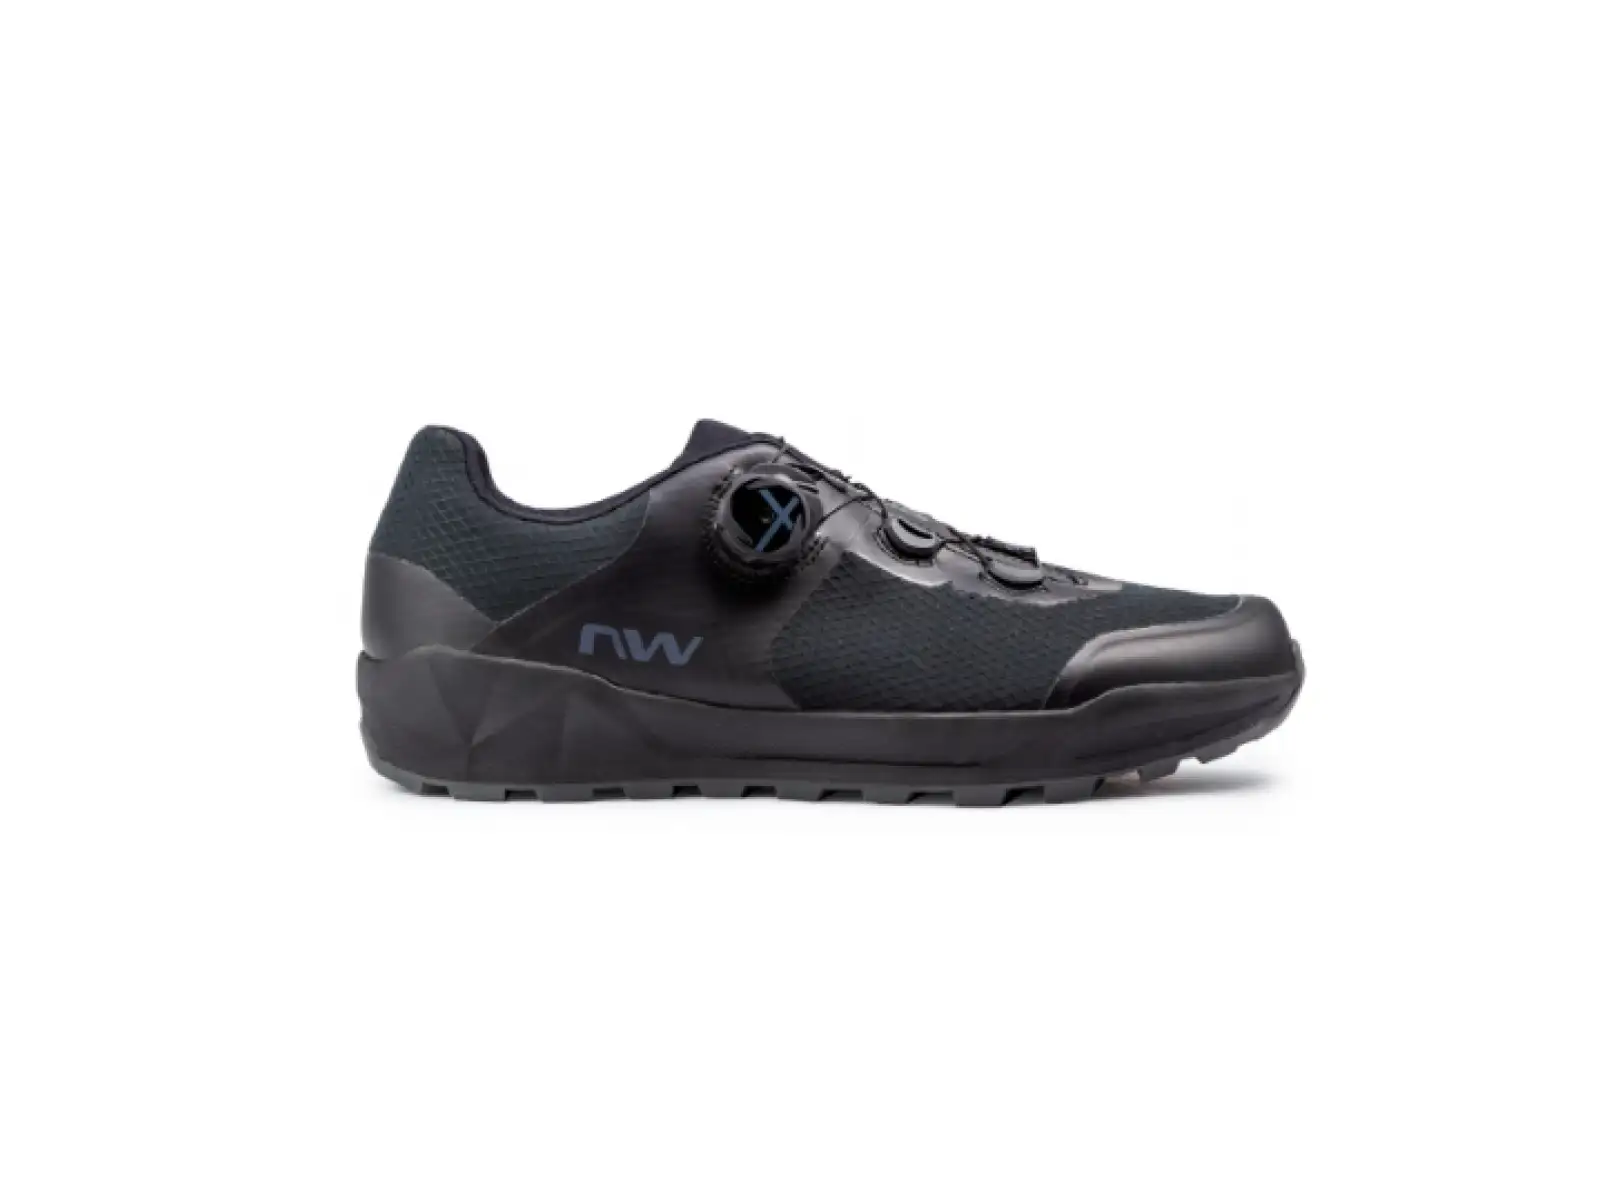 Northwave Corsair 2 cycling shoes, black